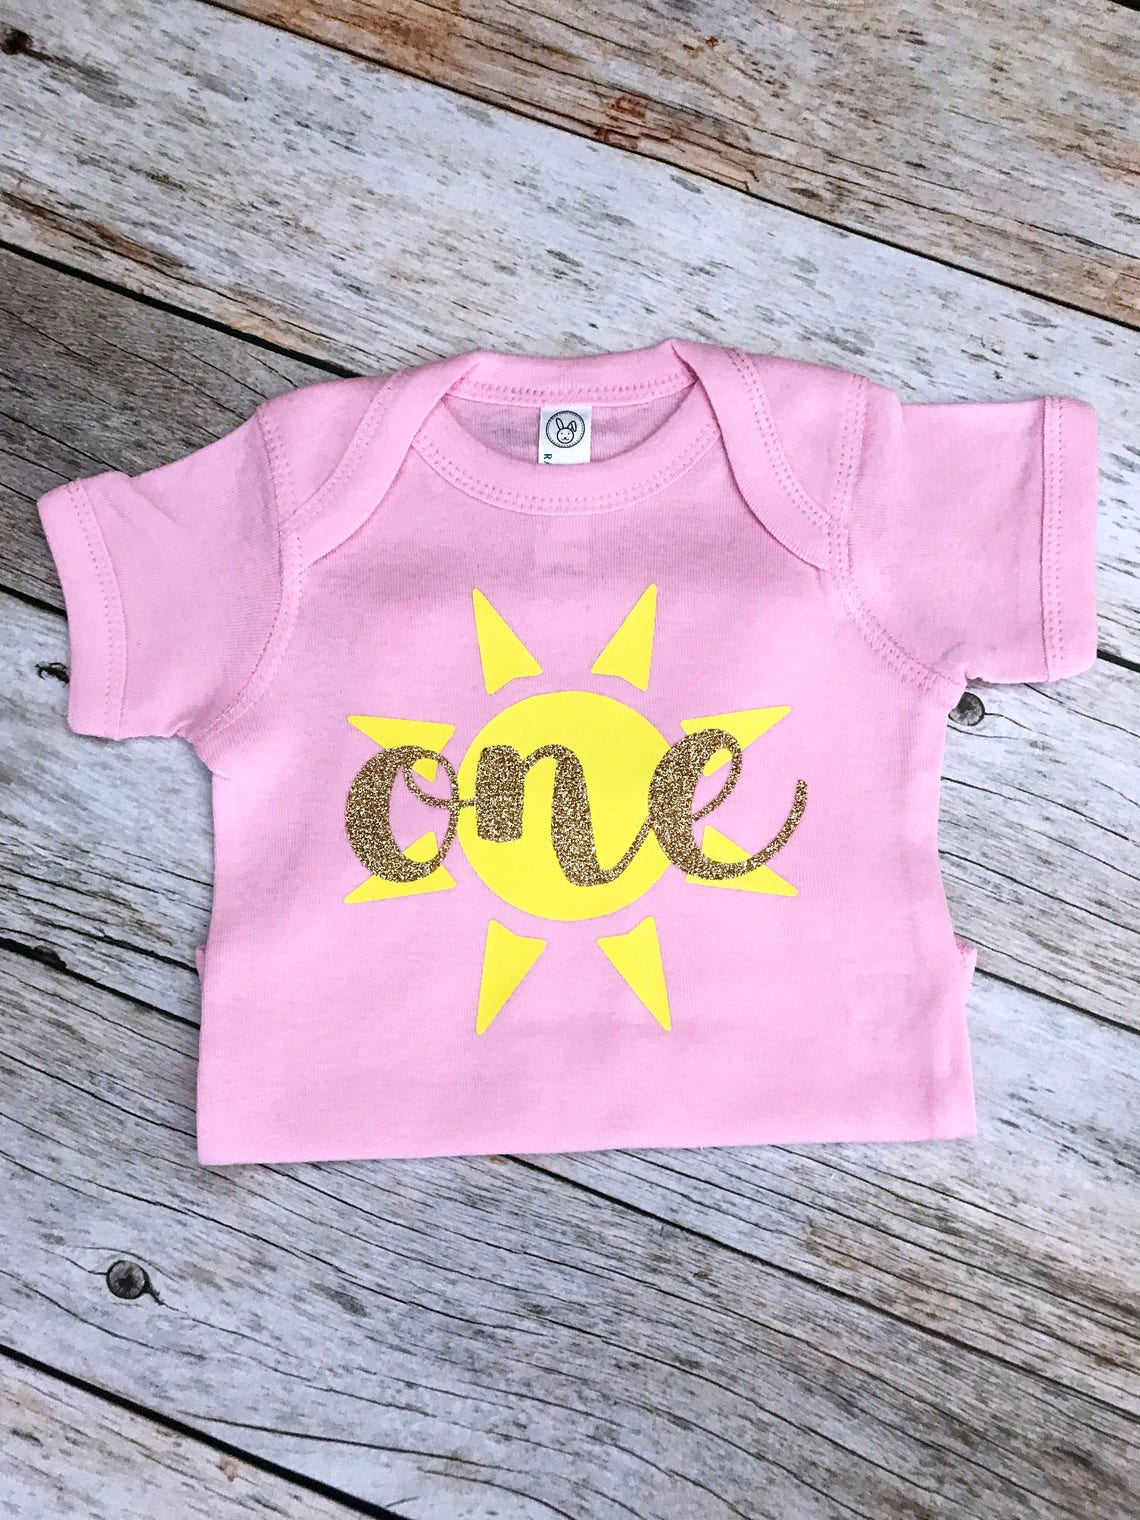 Pink and Yellow Sunshine First Birthday Shirt Pink and Yellow | Etsy